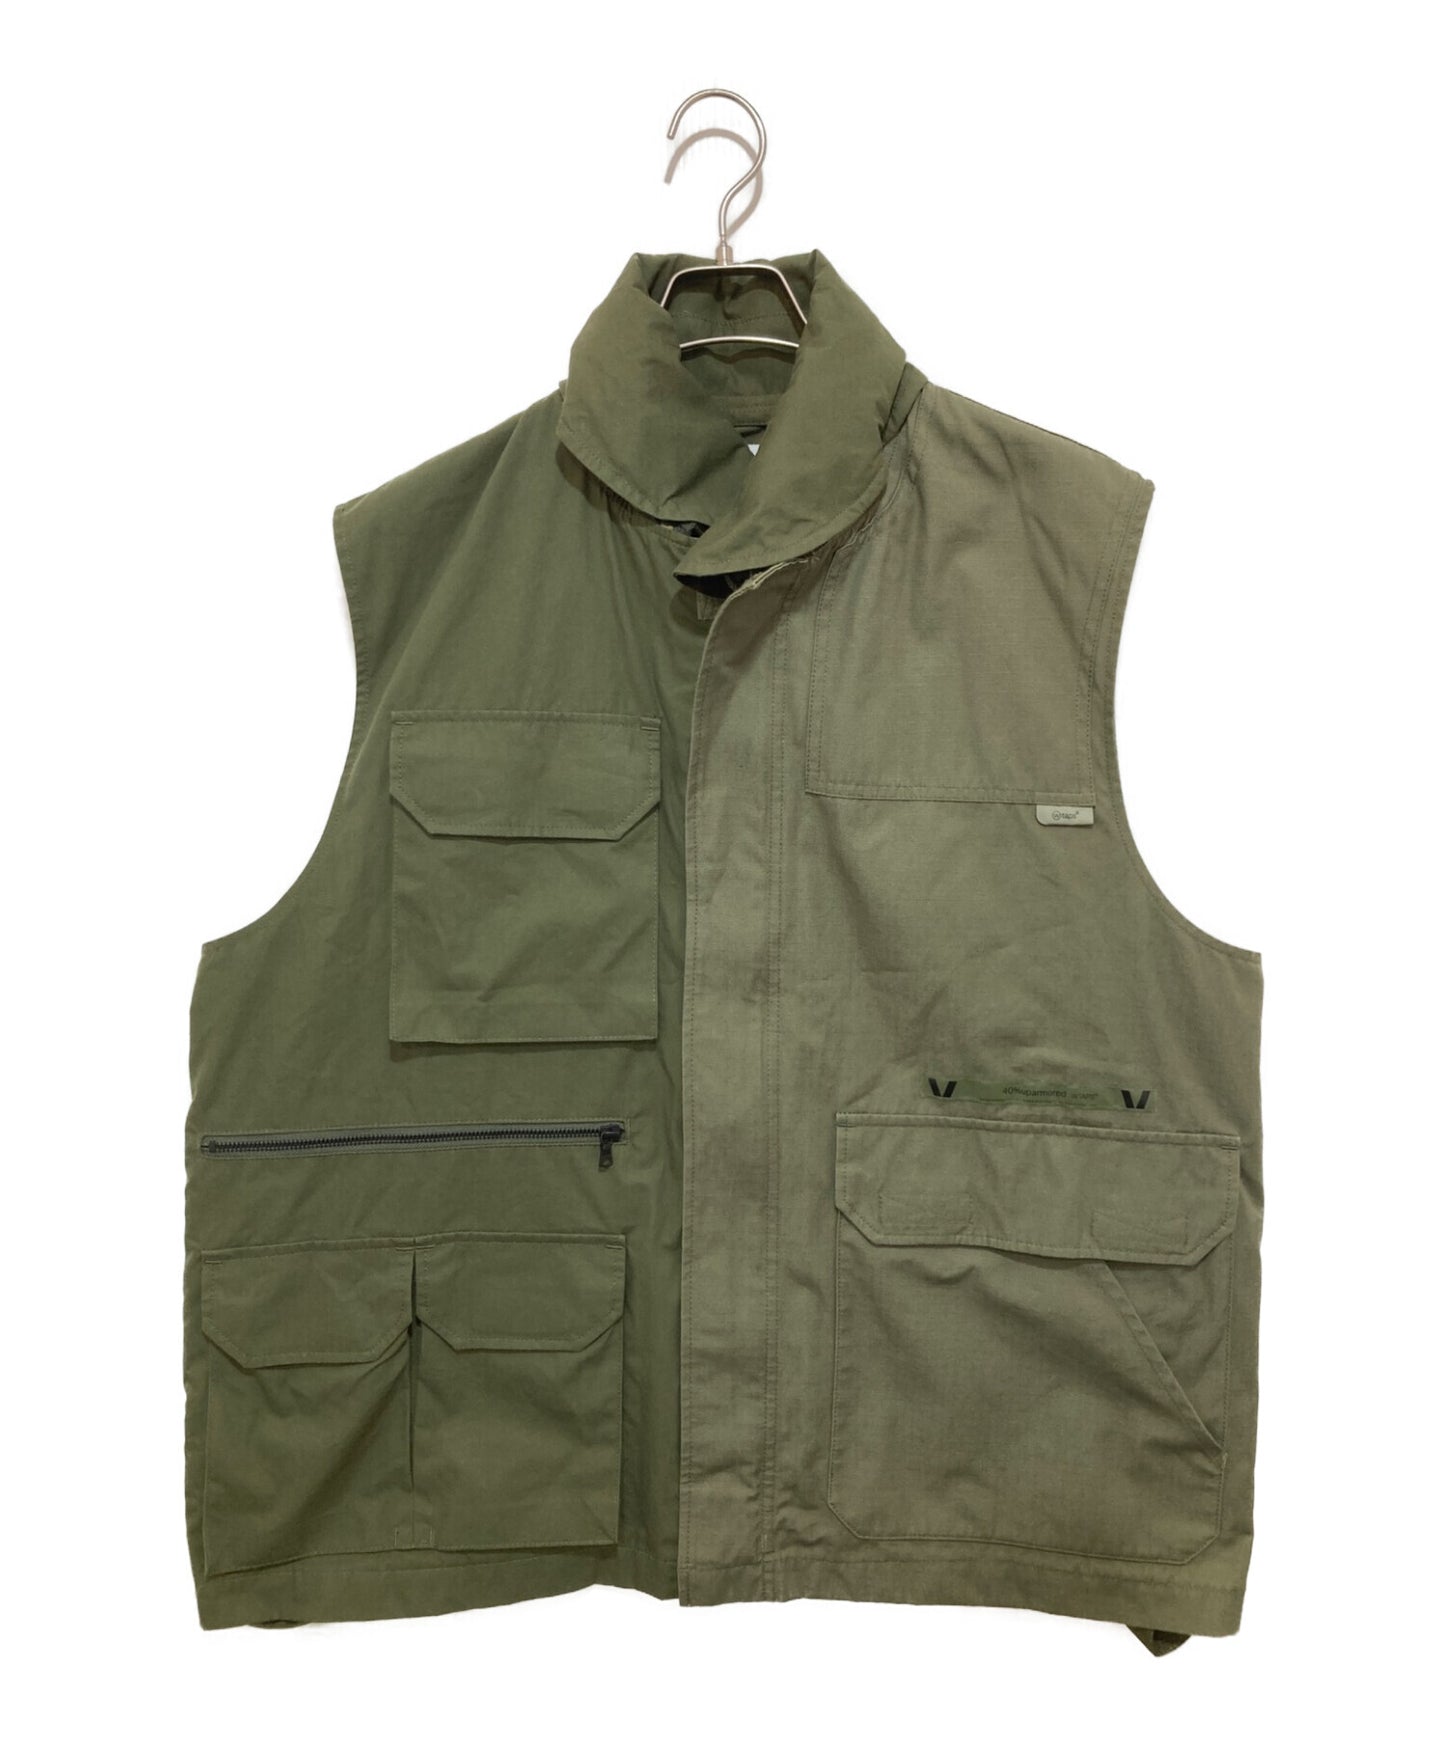 Pre-owned] WTAPS TRADER VEST COTTON WEATHER RIPSTOP 212BRDT-JKM07